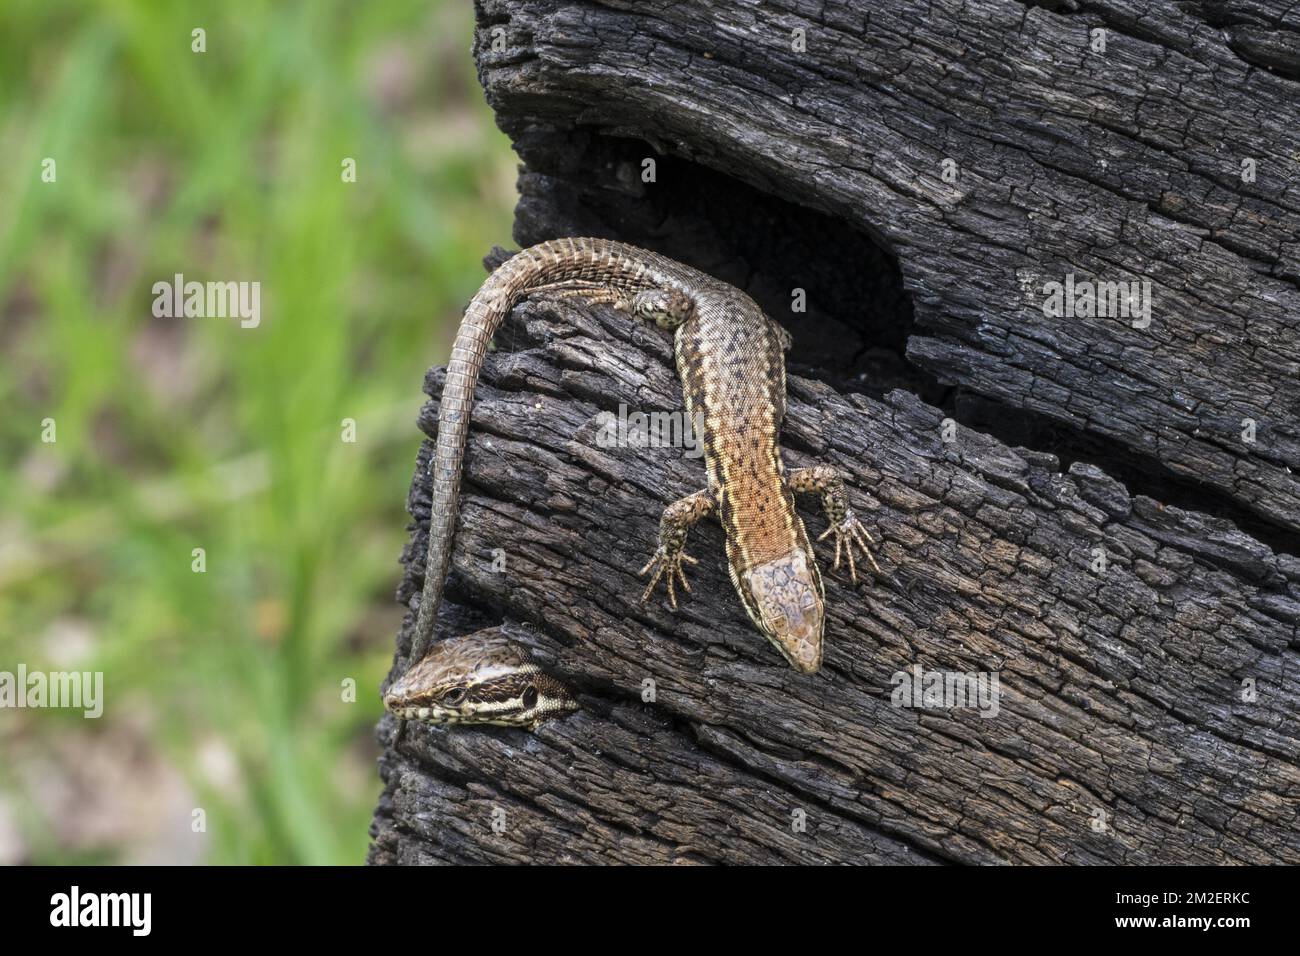 Two common wall lizards (Podarcis muralis / Lacerta muralis) emerging from gaps in scorched tree trunk | Lézard des murailles (Podarcis muralis) 23/04/2018 Stock Photo